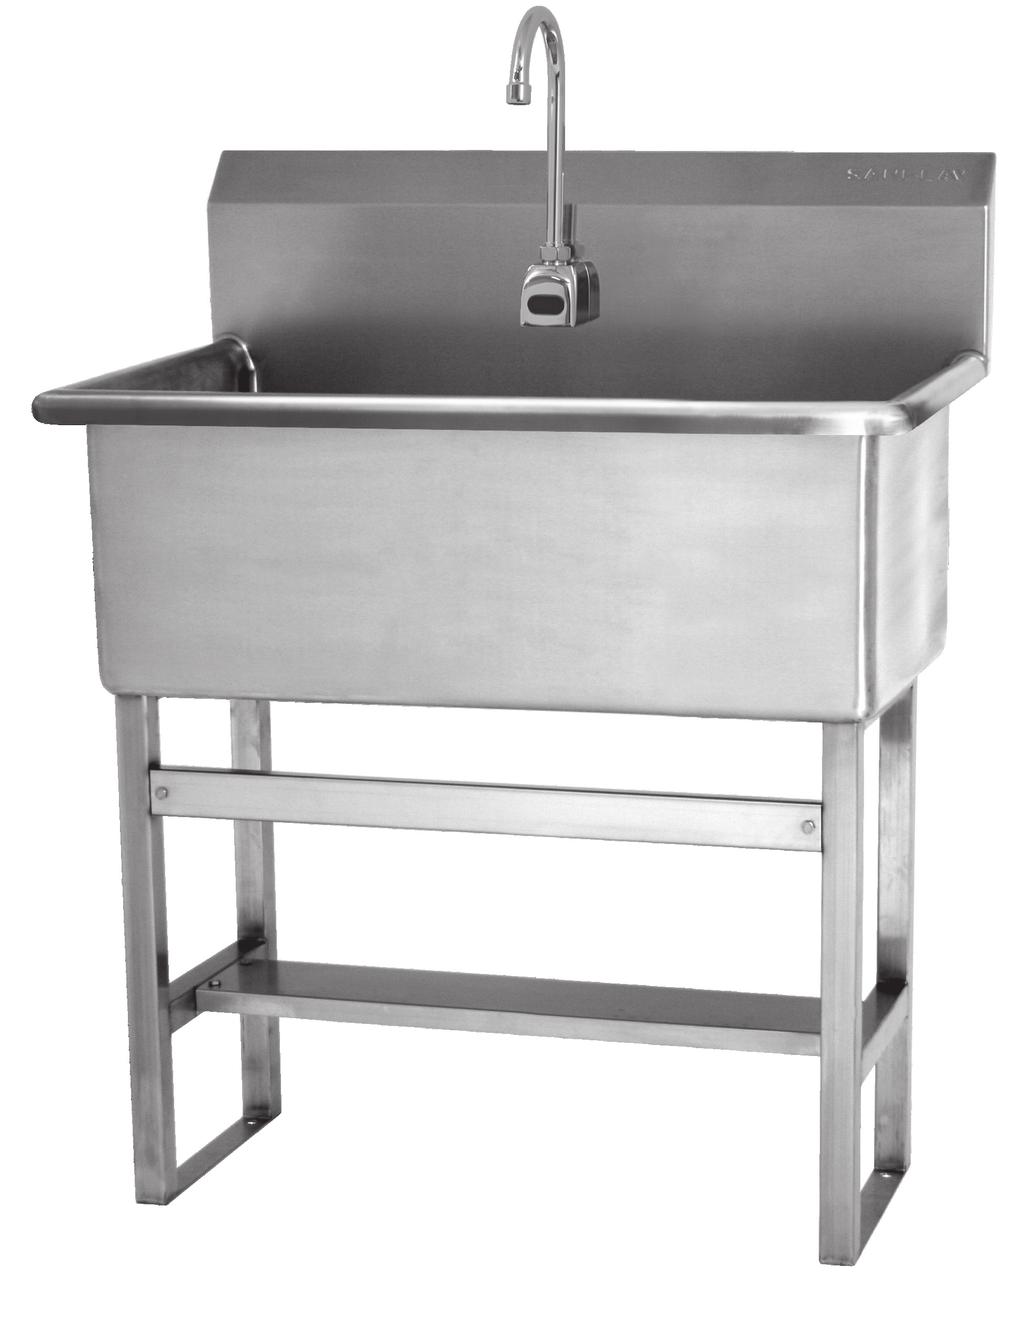 HANDS-FREE FLOOR MOUNTED SCRUB SINK AC OR BATTERY POWERED 1